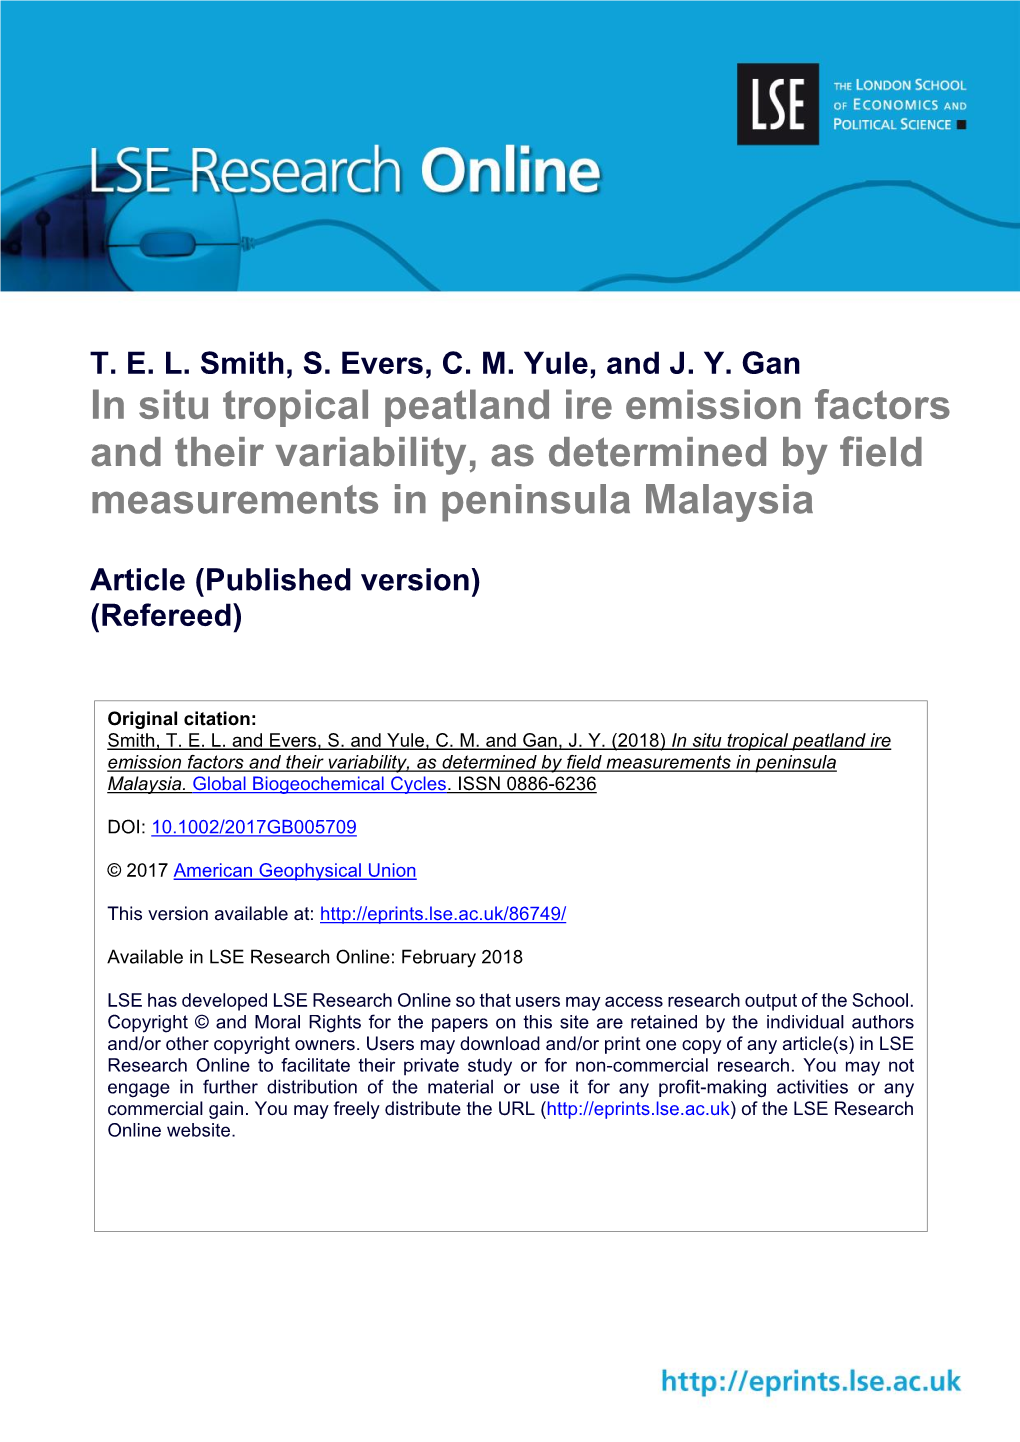 In Situ Tropical Peatland Ire Emission Factors and Their Variability, As Determined by Field Measurements in Peninsula Malaysia